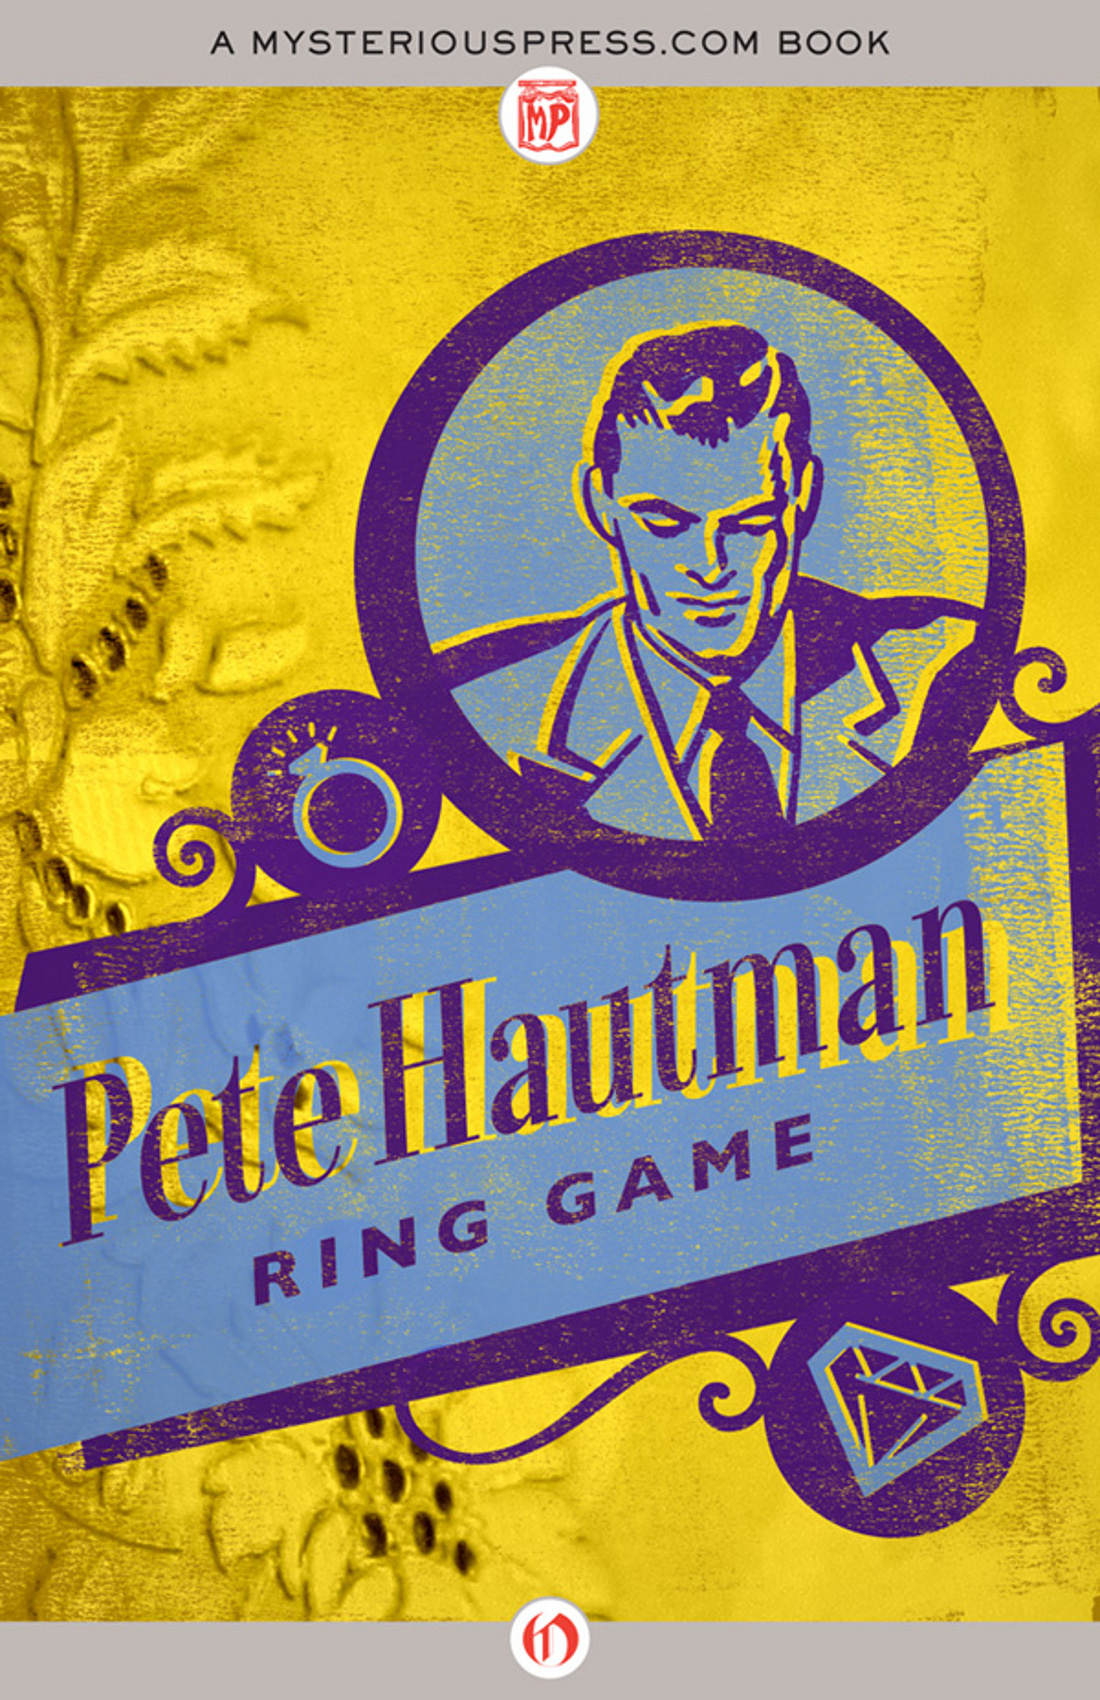 Ring Game by Pete Hautman